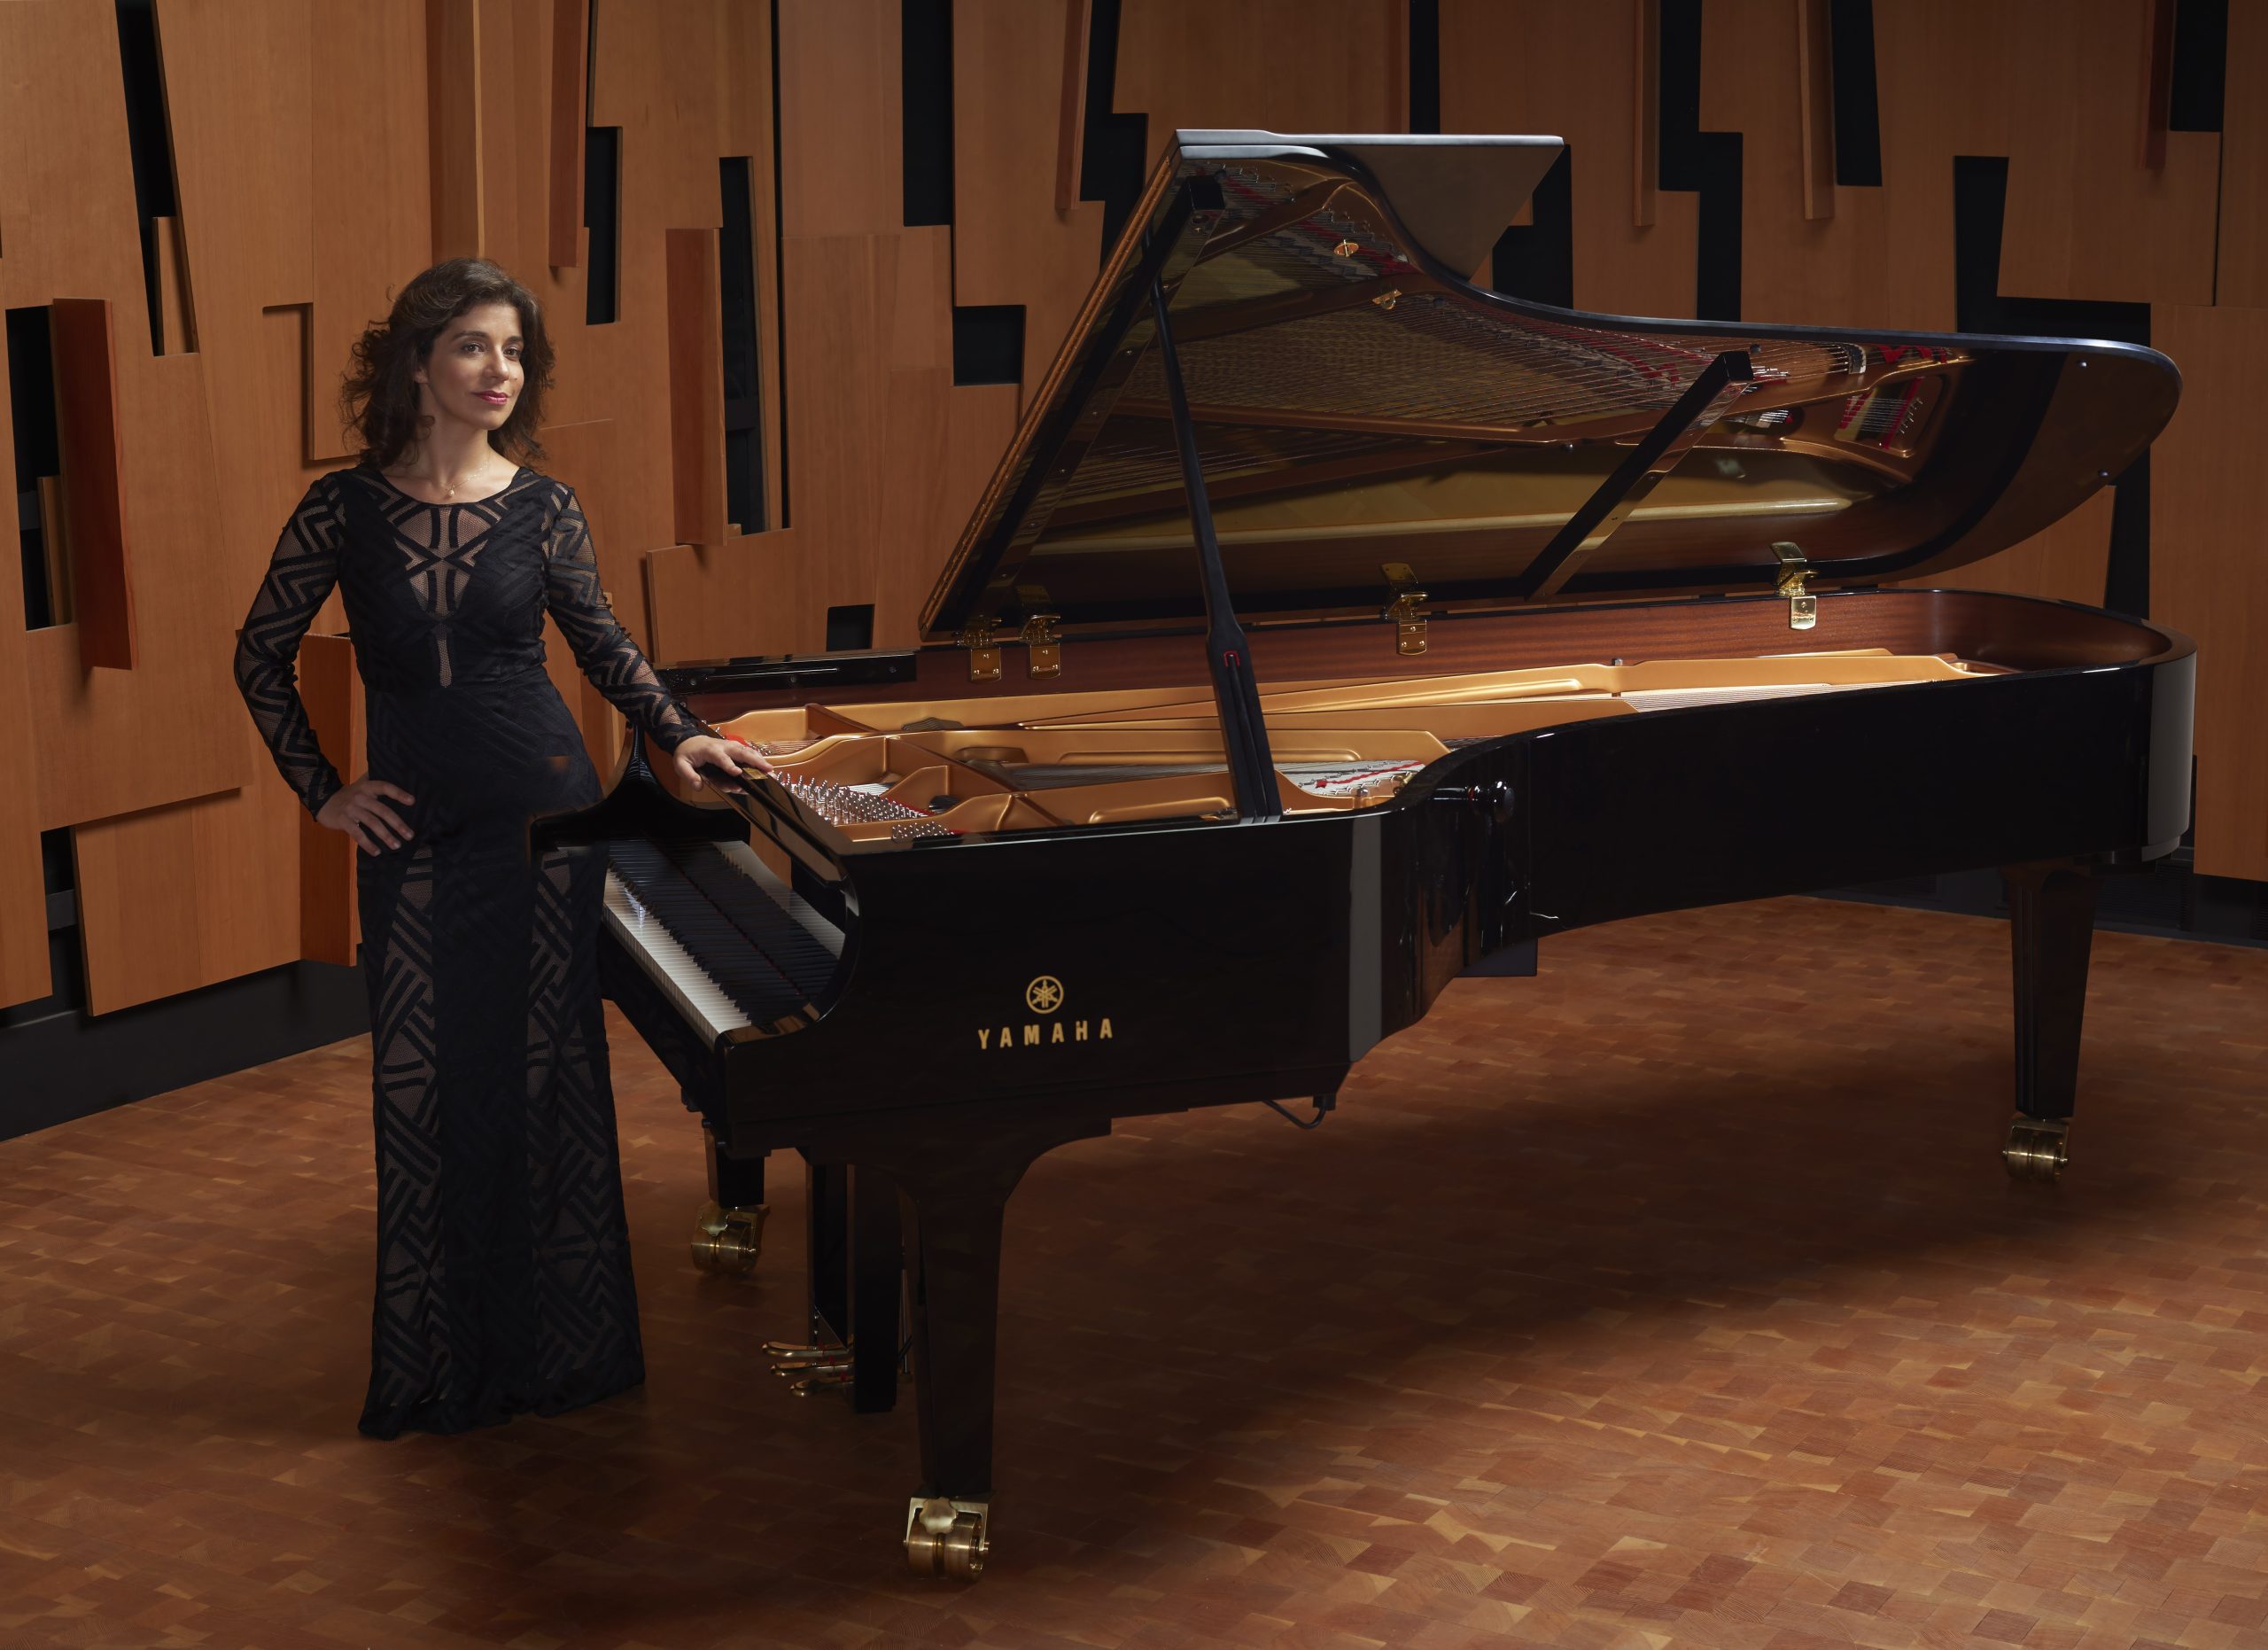 Inna Faliks stands next to a grand piano with her left hand resting on the instrument just above the keys. She wears a full-length, form-fitting, black gown.